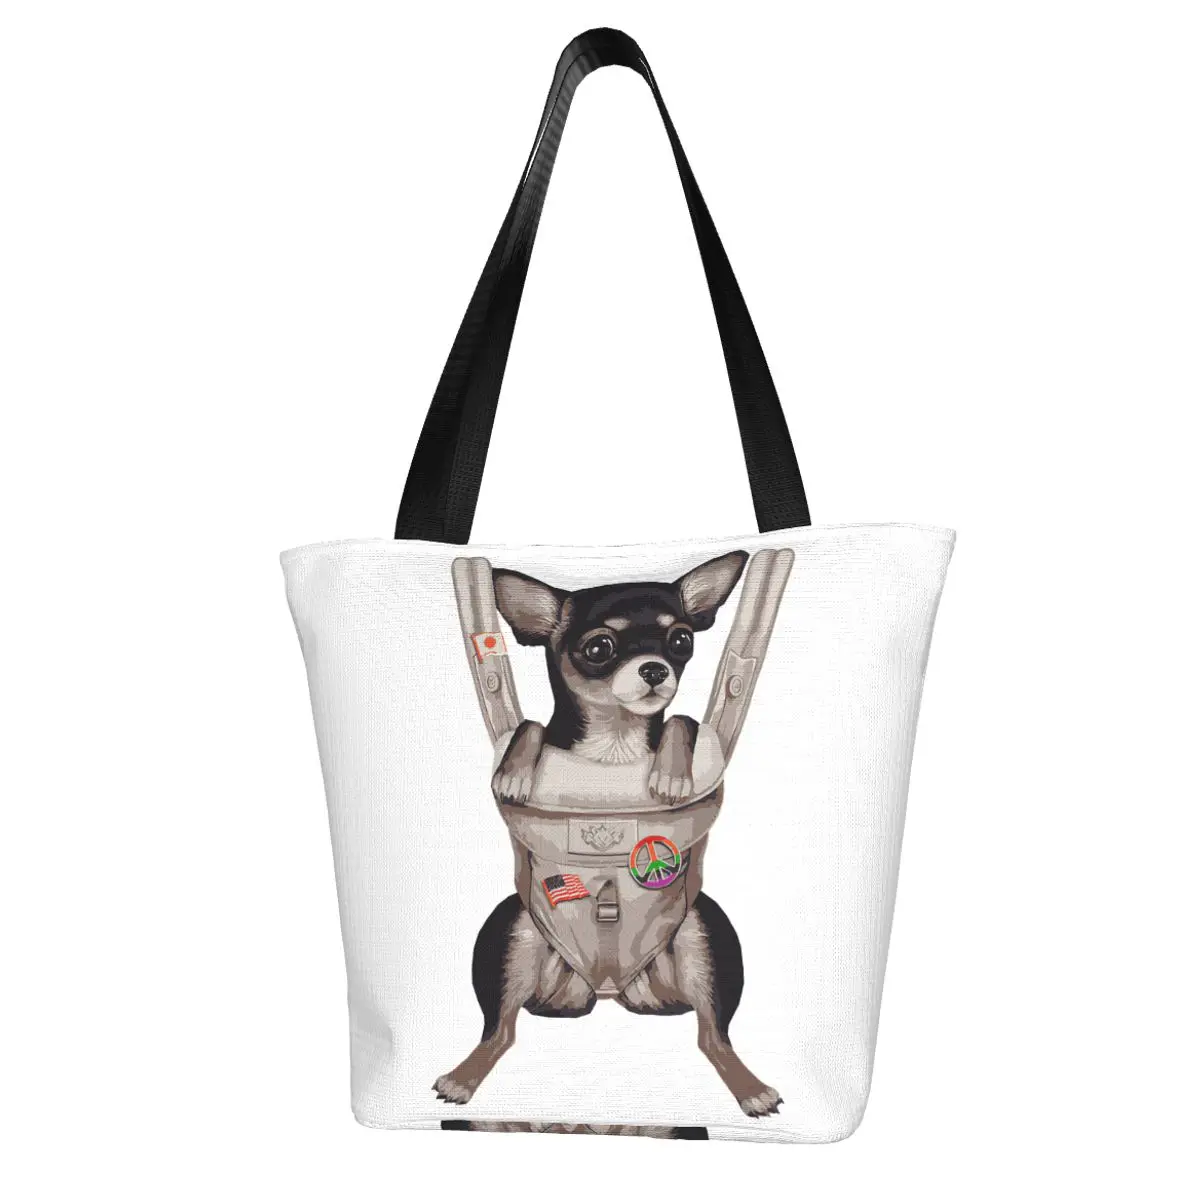 Black Chihuahua Dog In Baby Carrier Shopping Bag Aesthetic Cloth Outdoor Handbag Female Fashion Bags